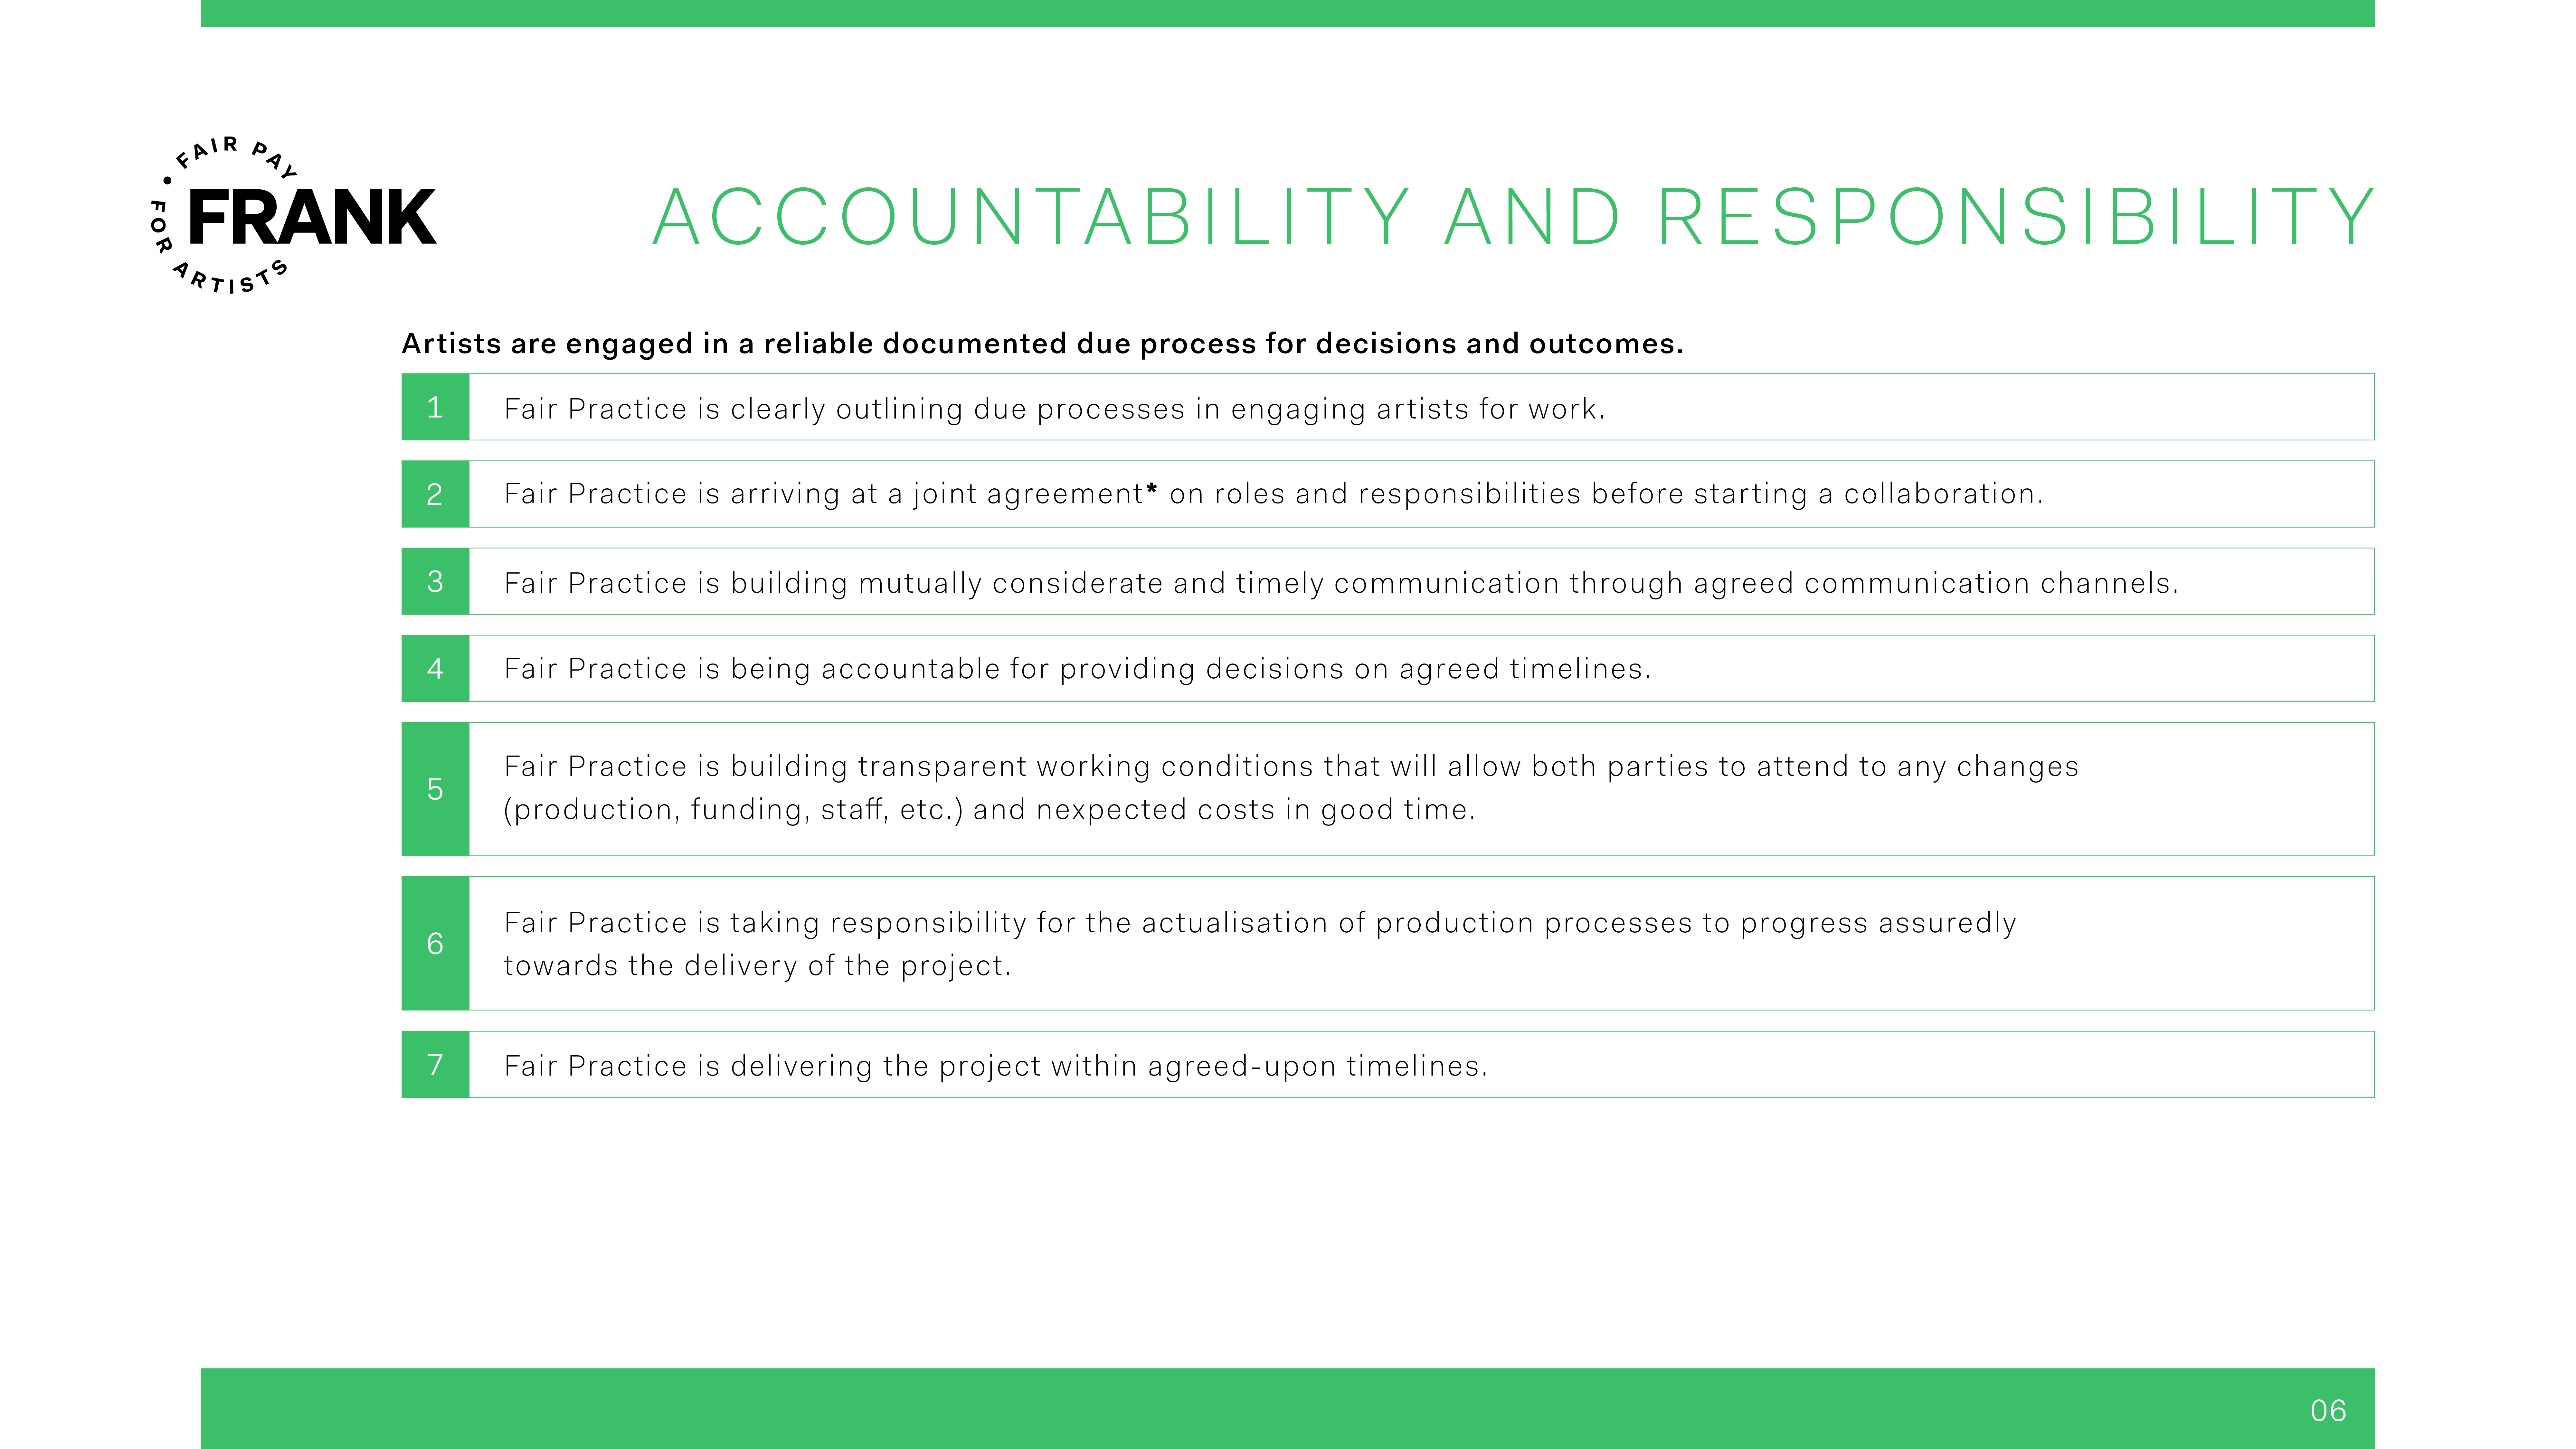 Accountability and Responsibility: Artists are engaged in a reliable documented due process for decisions and outcomes. 1) Fair Practice is clearly outlining due processes in engaging artists for work. 2) Fair Practice is arriving at a joint agreement* on roles and responsibilities before starting a collaboration. 3) Fair Practice is building mutually considerate and timely communication through agreed communication channels. 4) Fair Practice is being accountable for providing decisions on agreed timelines. 5) Fair Practice is building transparent working conditions that will allow both parties to attend to any changes (production, funding, staff, etc.) and nexpected costs in good time. 6) Fair Practice is taking responsibility for the actualisation of production processes to progress assuredly towards the delivery of the project. 7) Fair Practice is delivering the project within agreed-upon timelines.